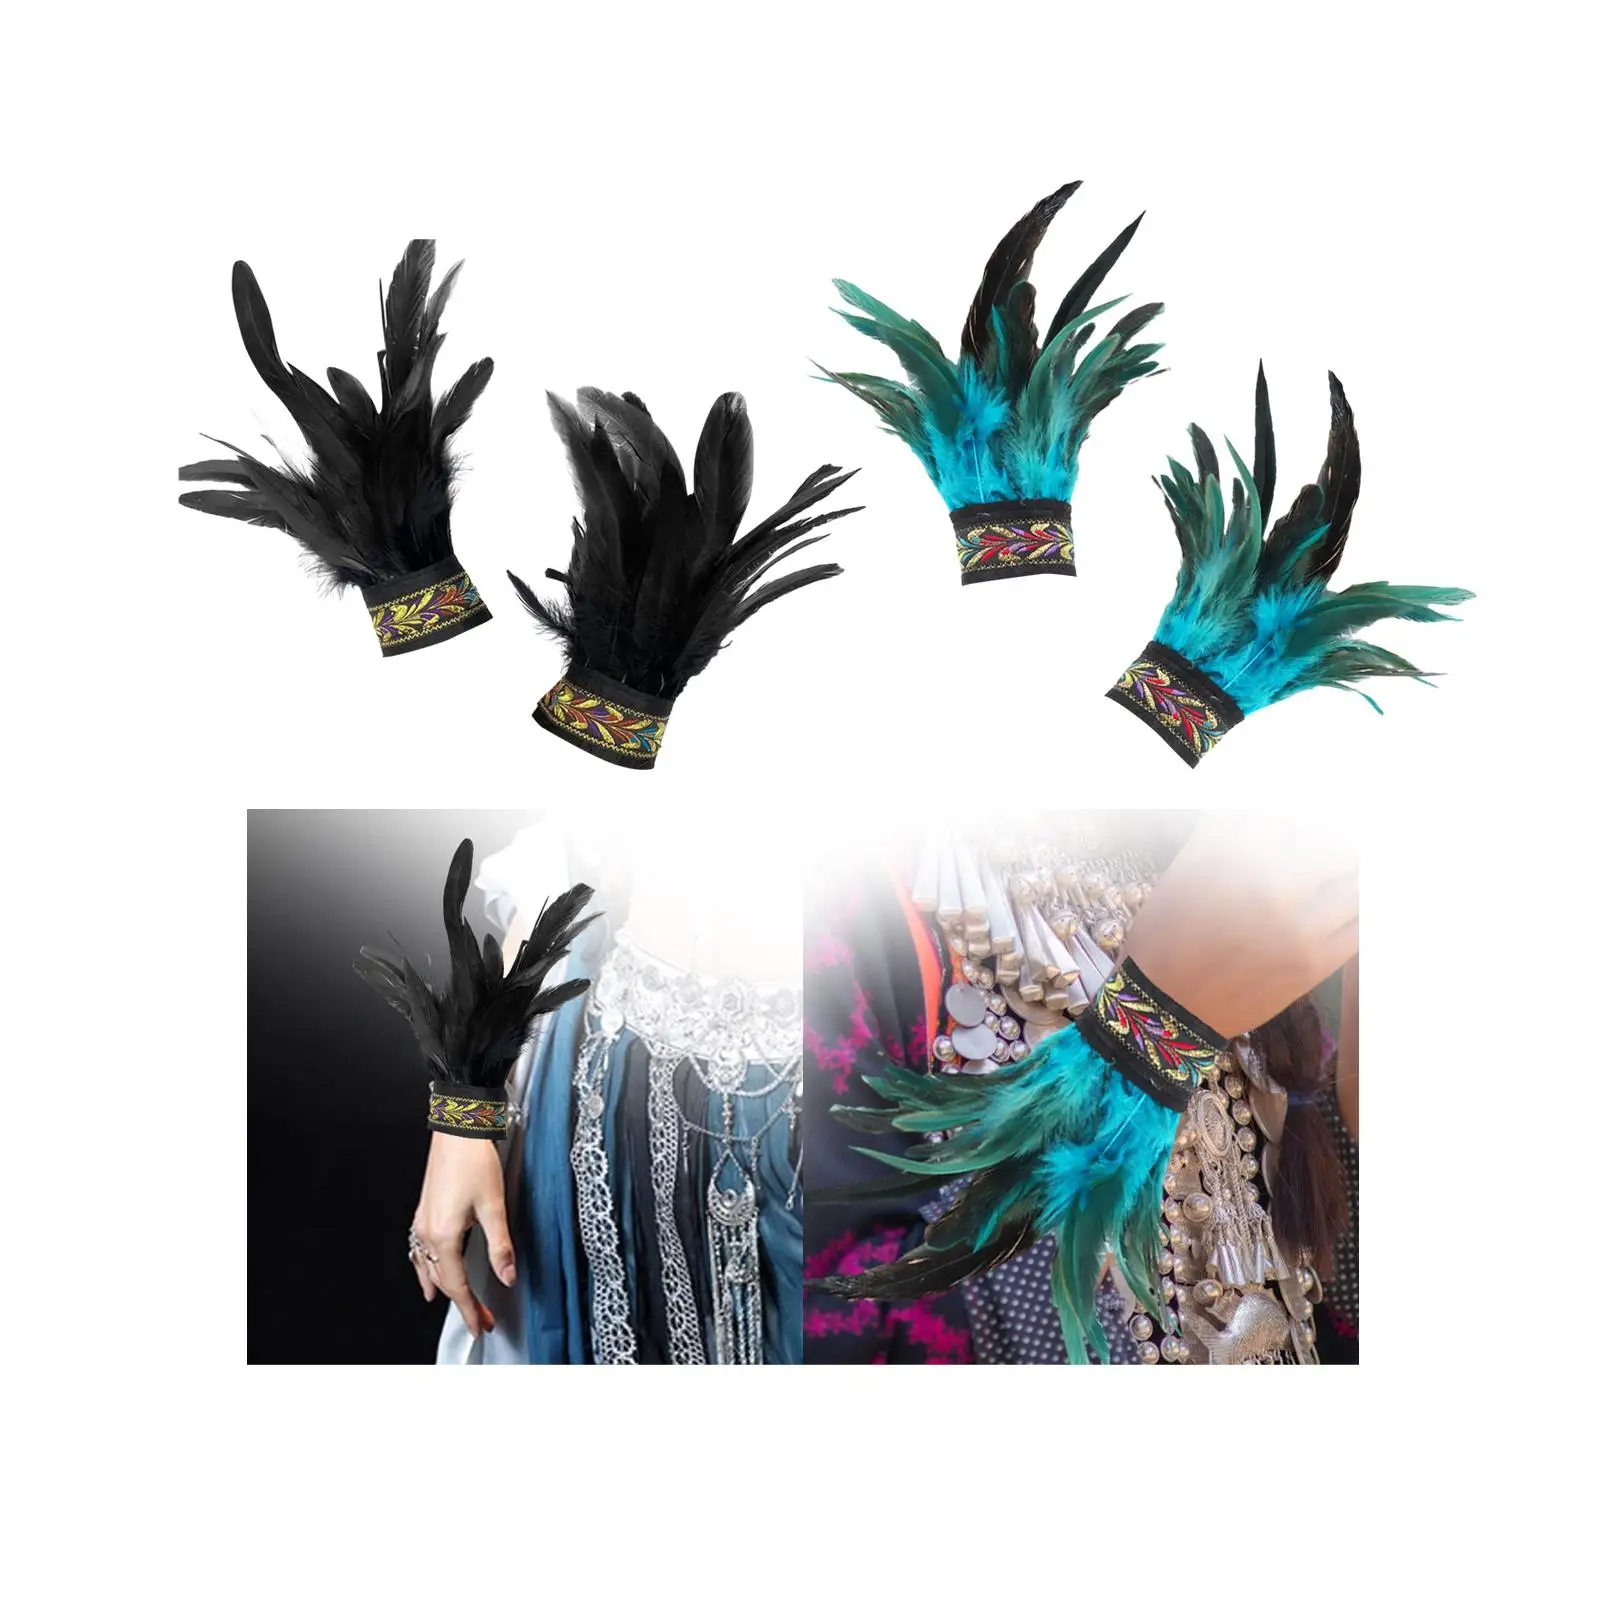 Feather Wrist Cuffs Feather Gloves Cuff Gothic Arm Warmers Faux Fur Wrist Sleeves for Halloween Cosplay Costumes Women Girls